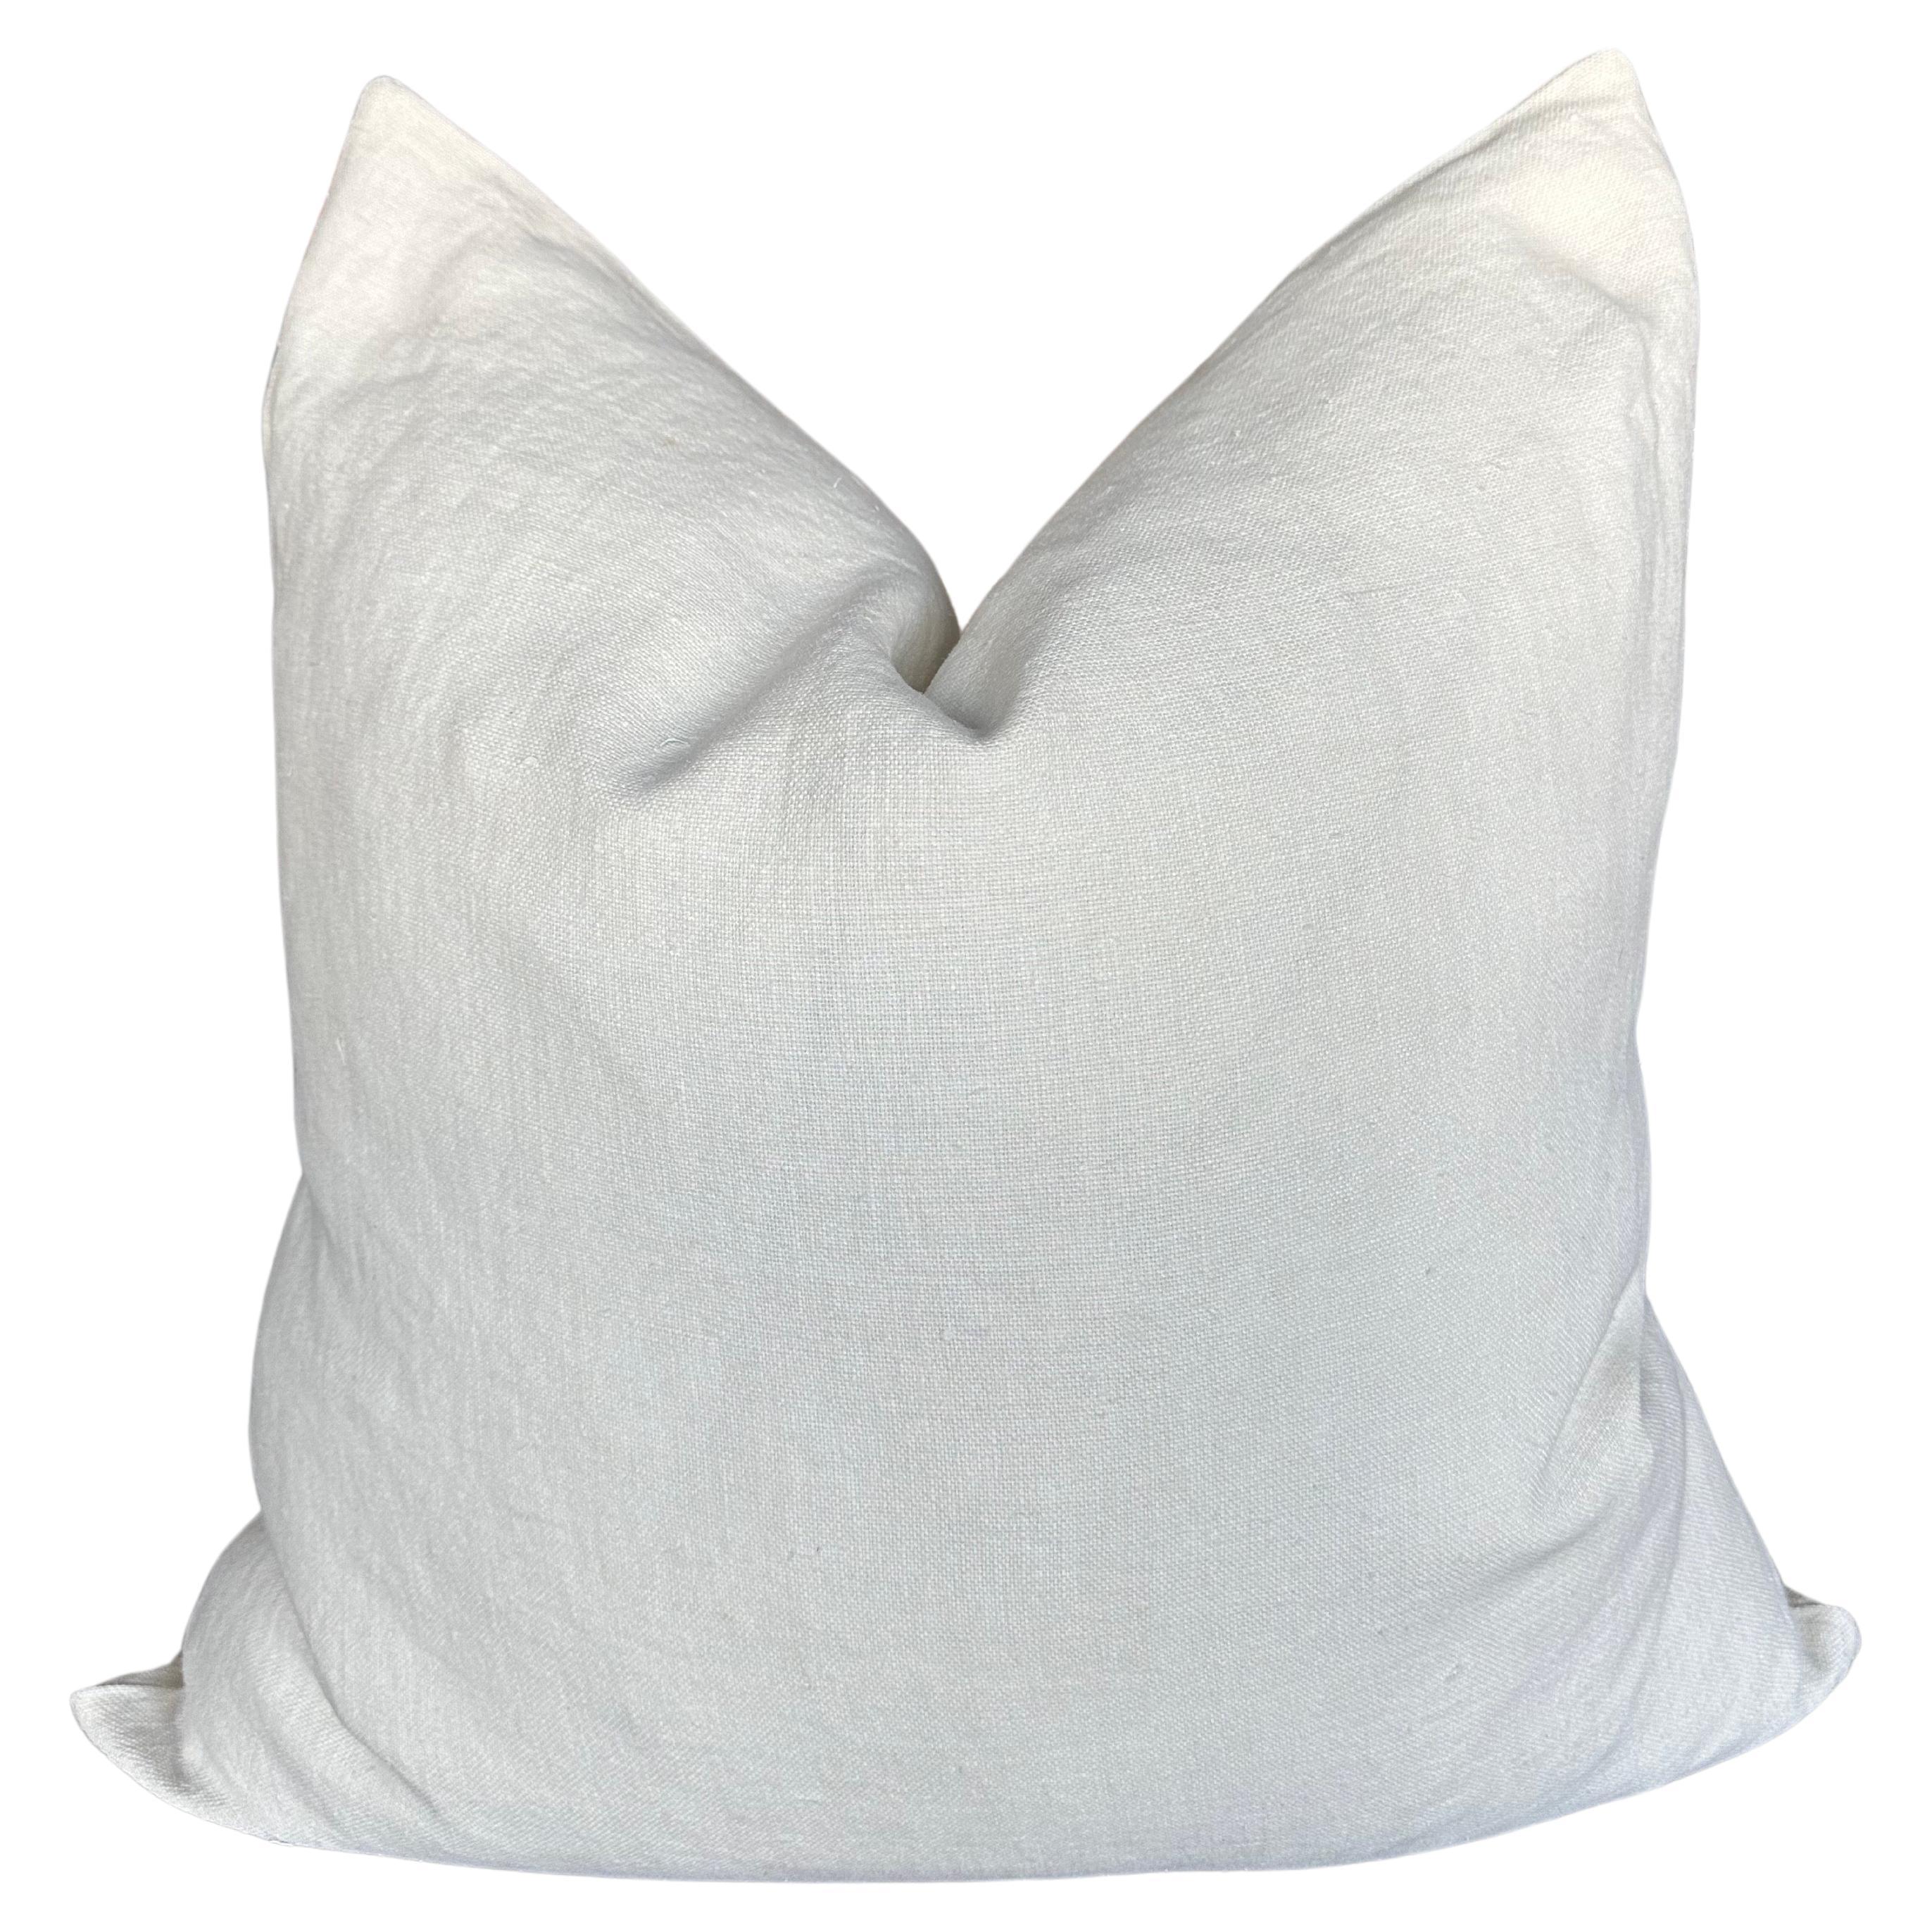 100% Belgium Linen Oyster White Pillow with Down Feather Insert